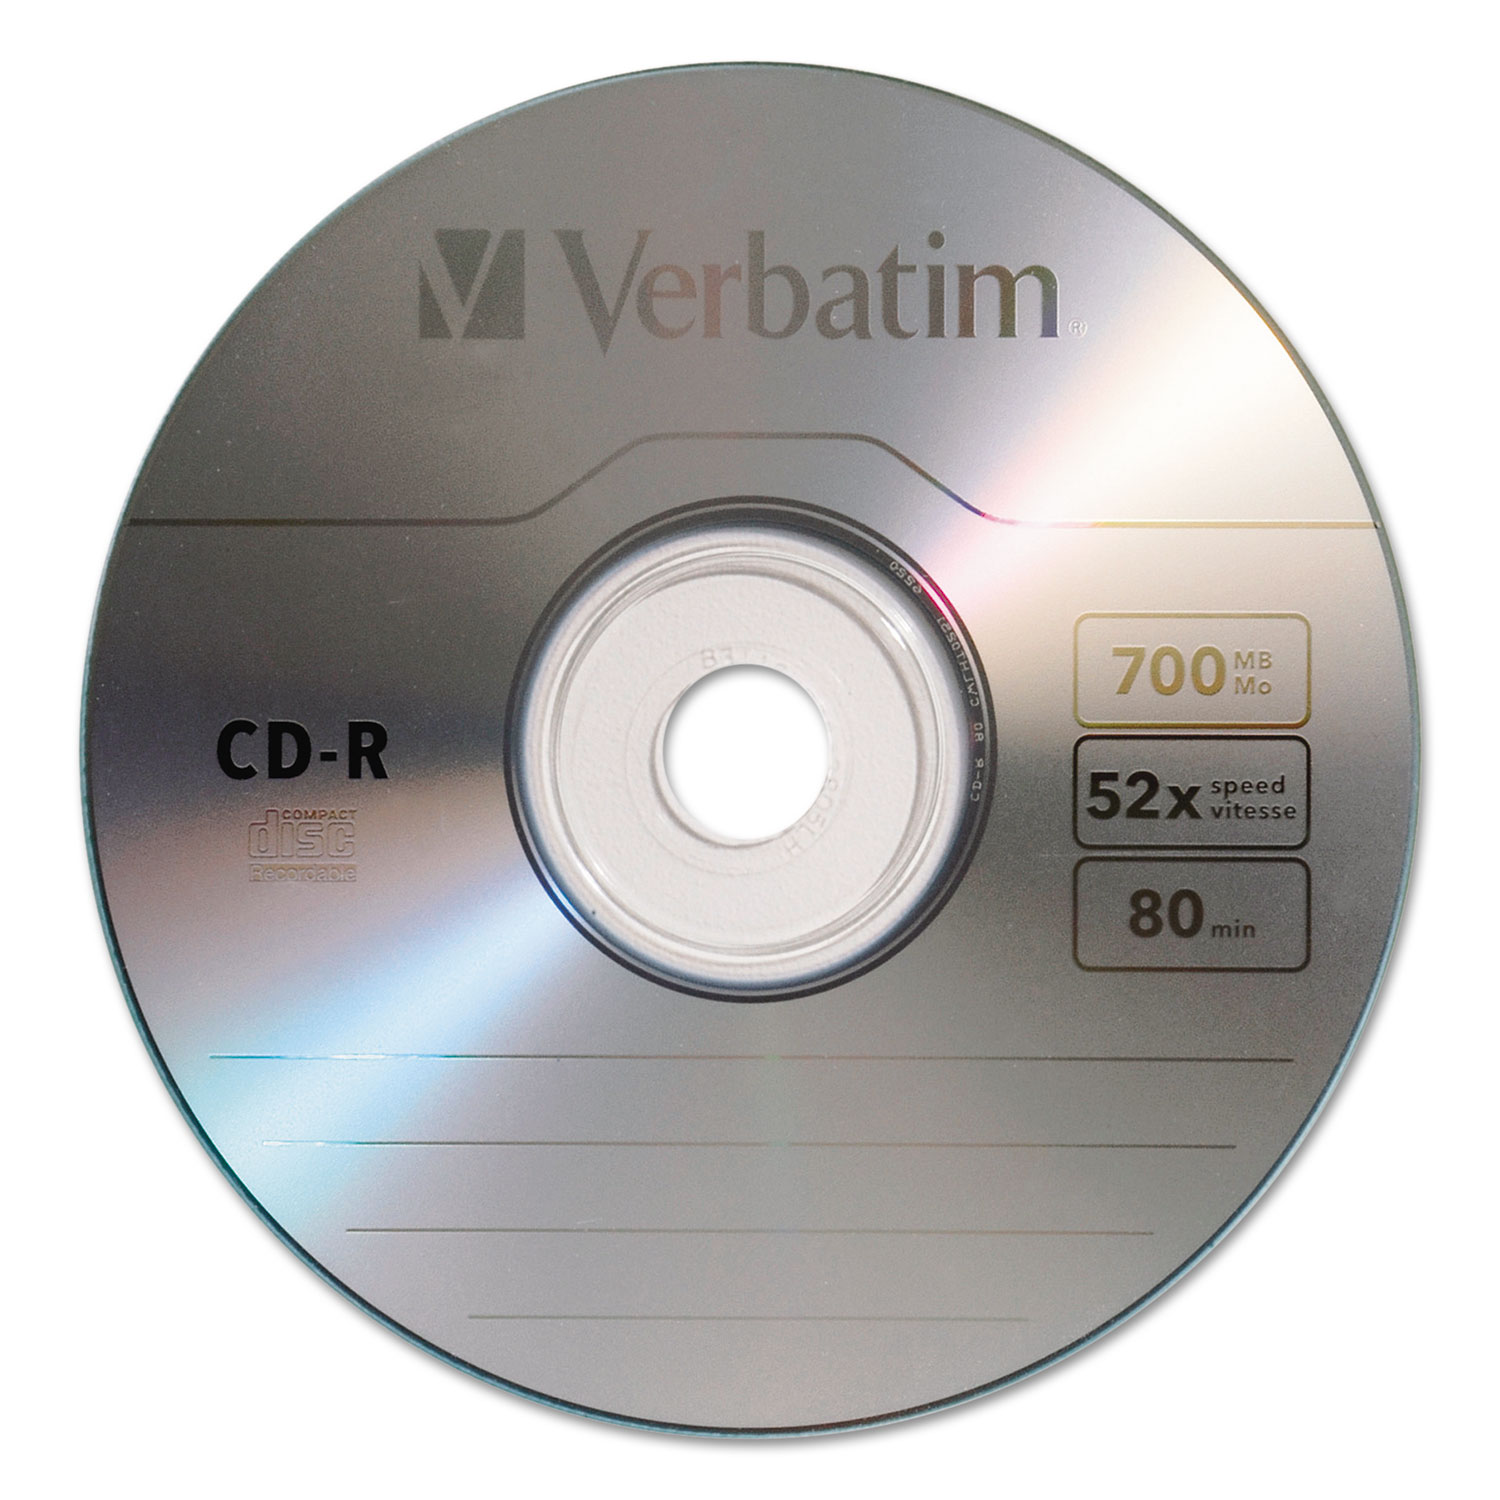 CD-R Discs, 700MB/80min, 52x, Spindle, Silver, 100/Pack